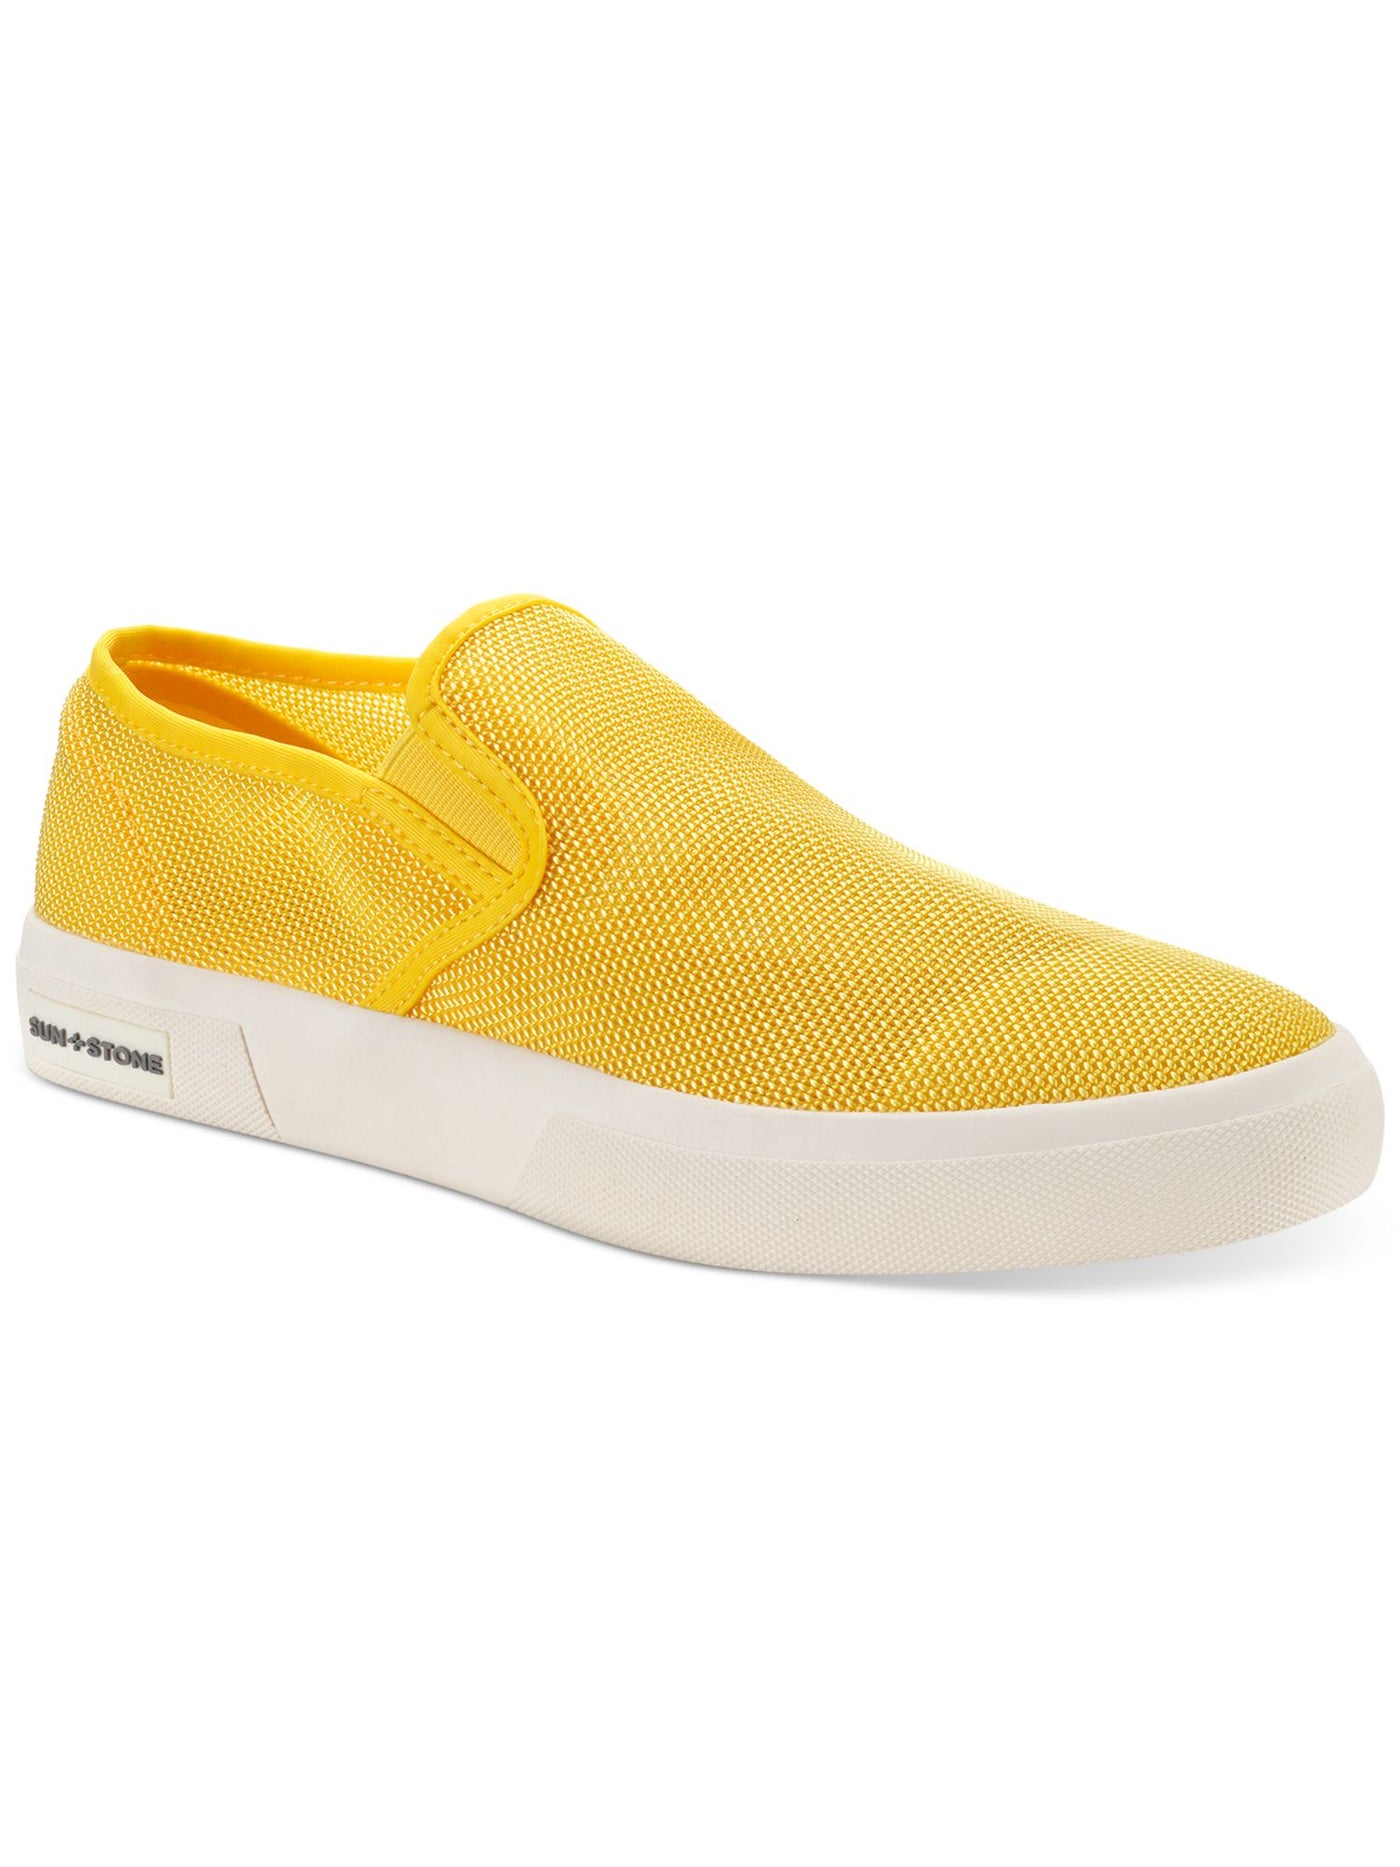 SUN STONE Mens Yellow Breathable Goring Lyle Round Toe Platform Slip On Sneakers Shoes 9.5 M